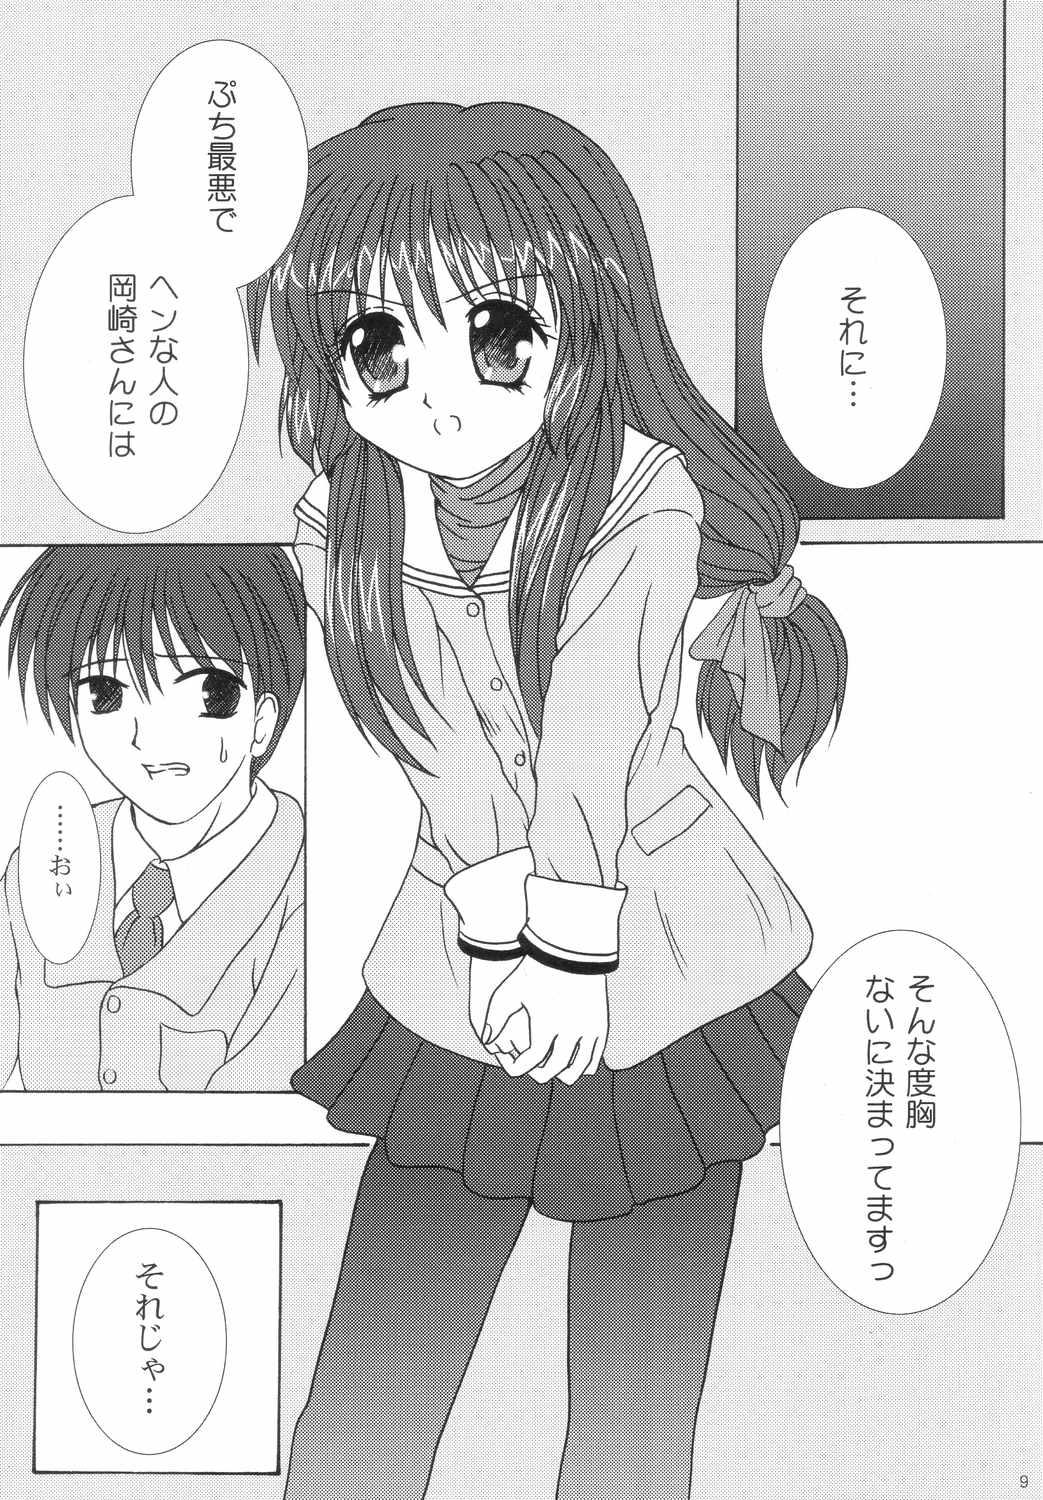 Ass Fucking Fuu! - Clannad Small Tits Porn - Page 8